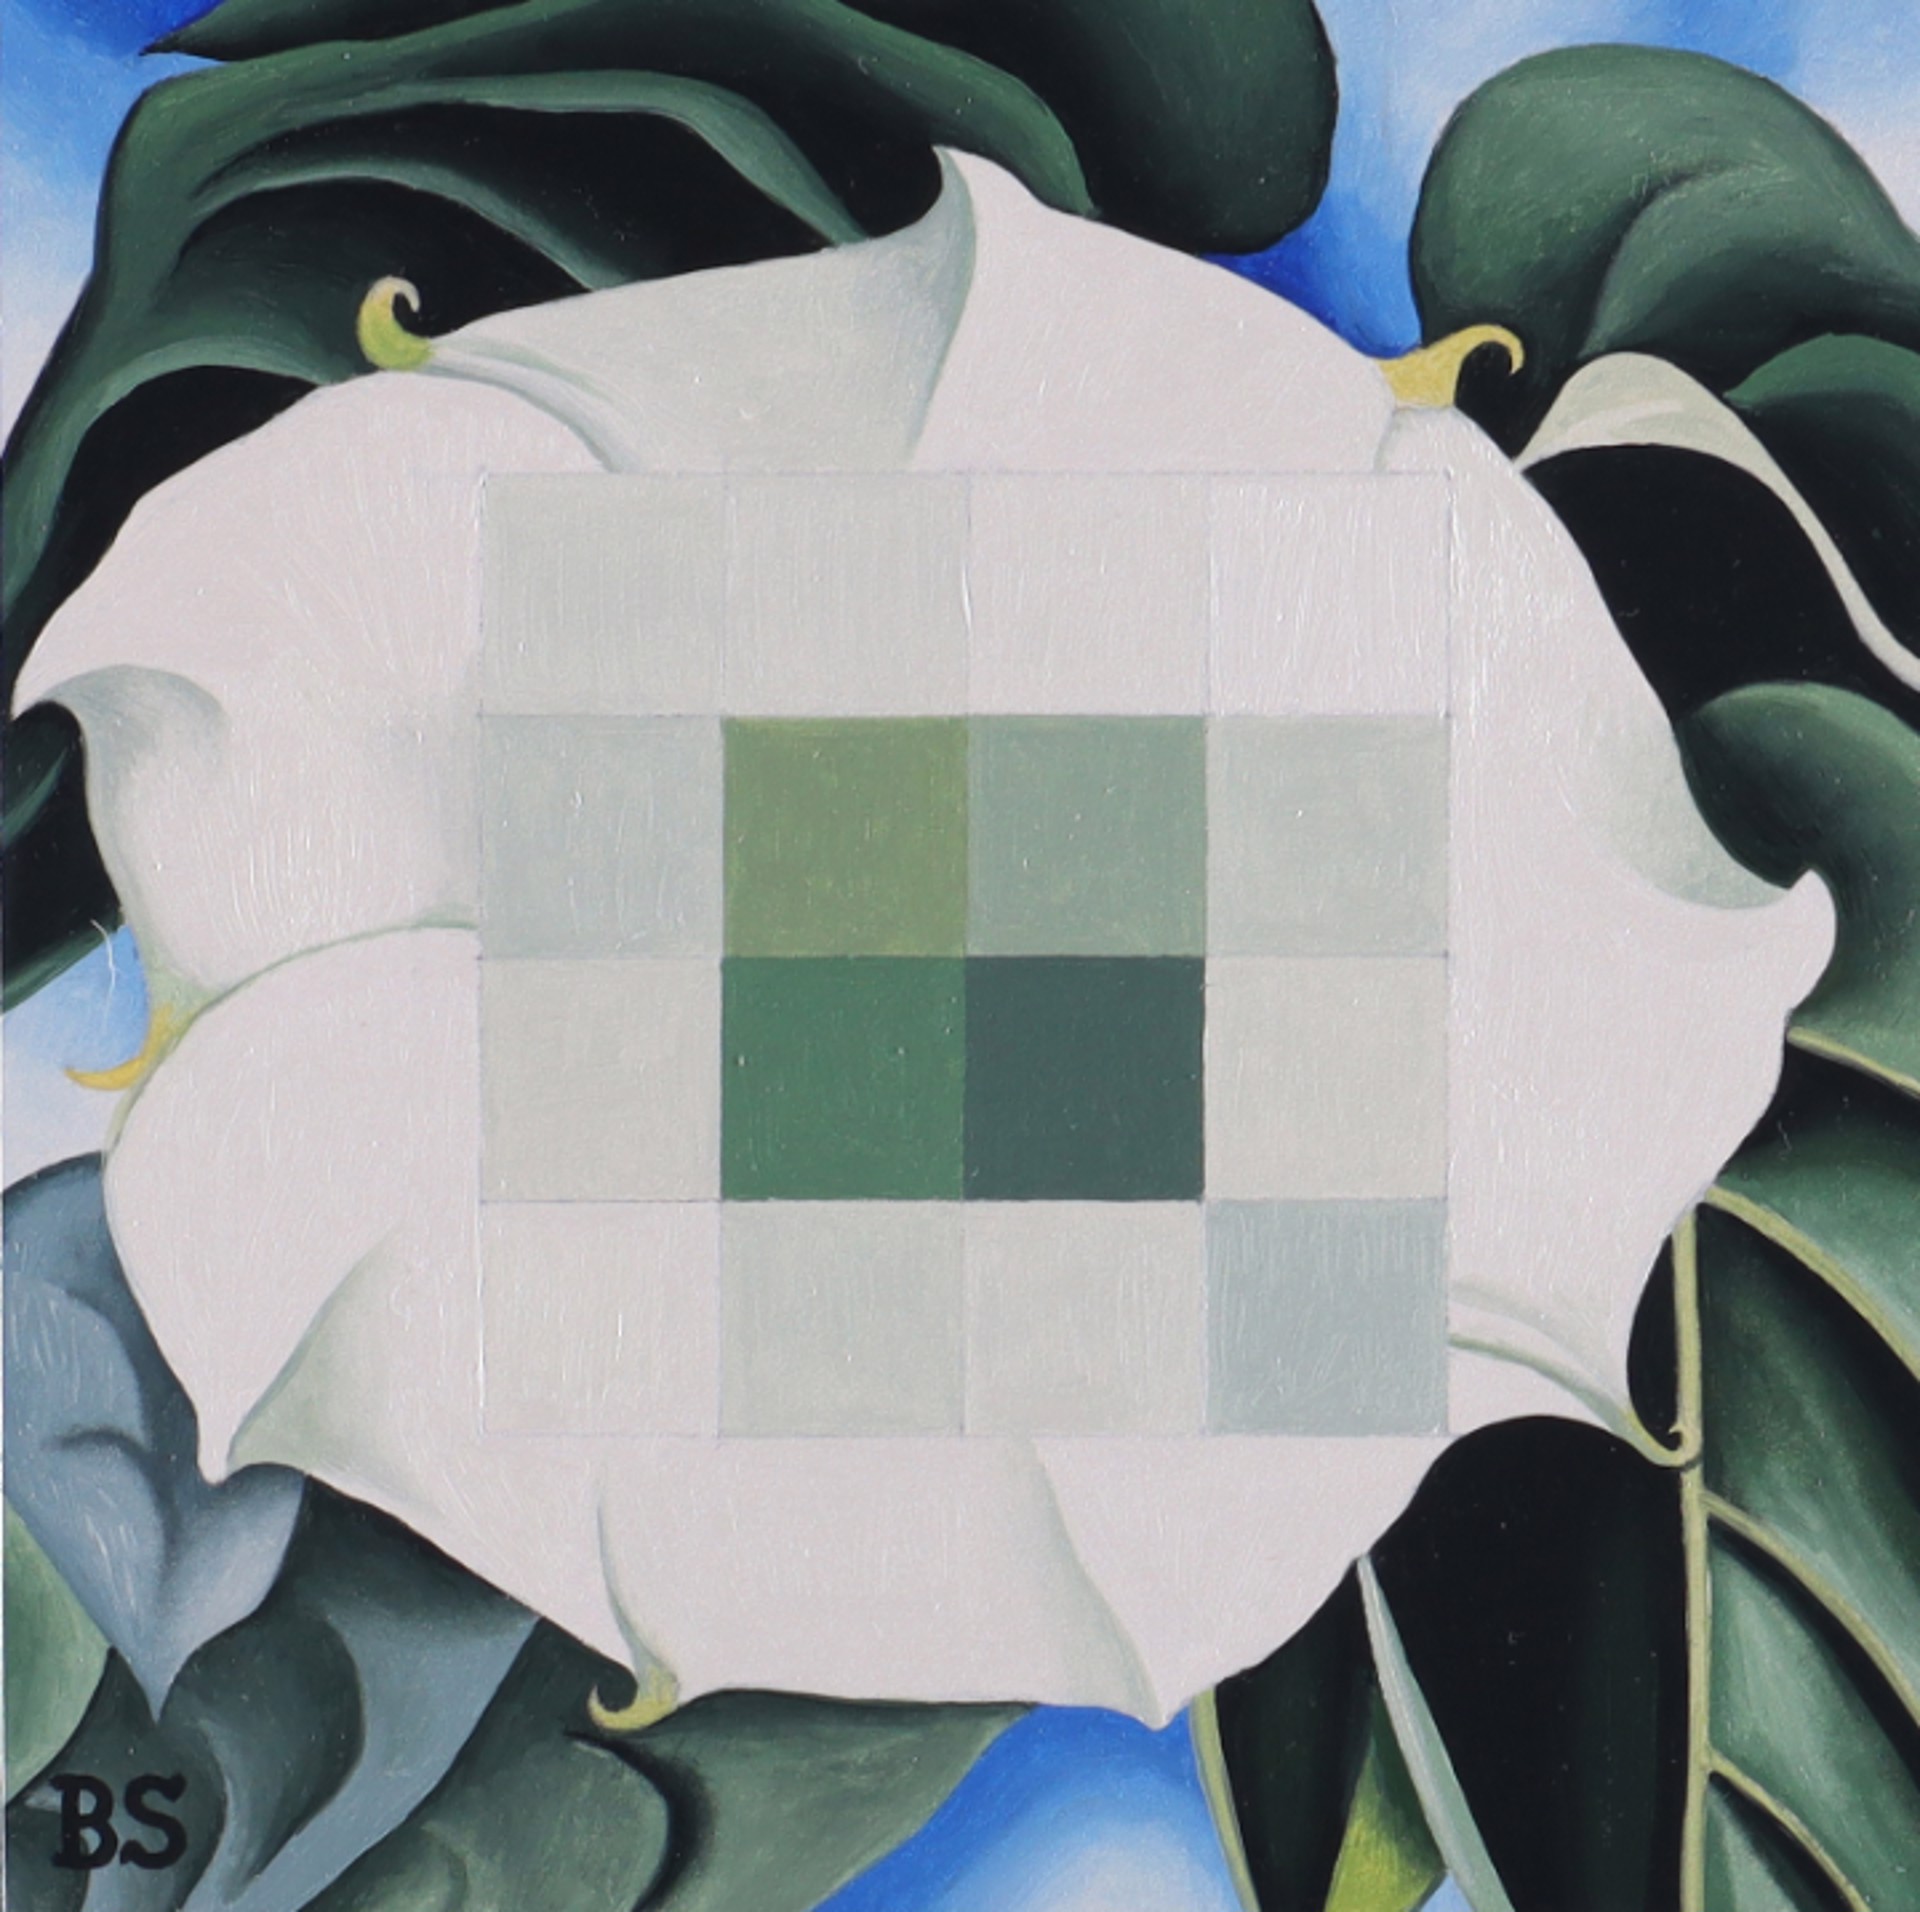 Censored: White Flowers by Ben Steele